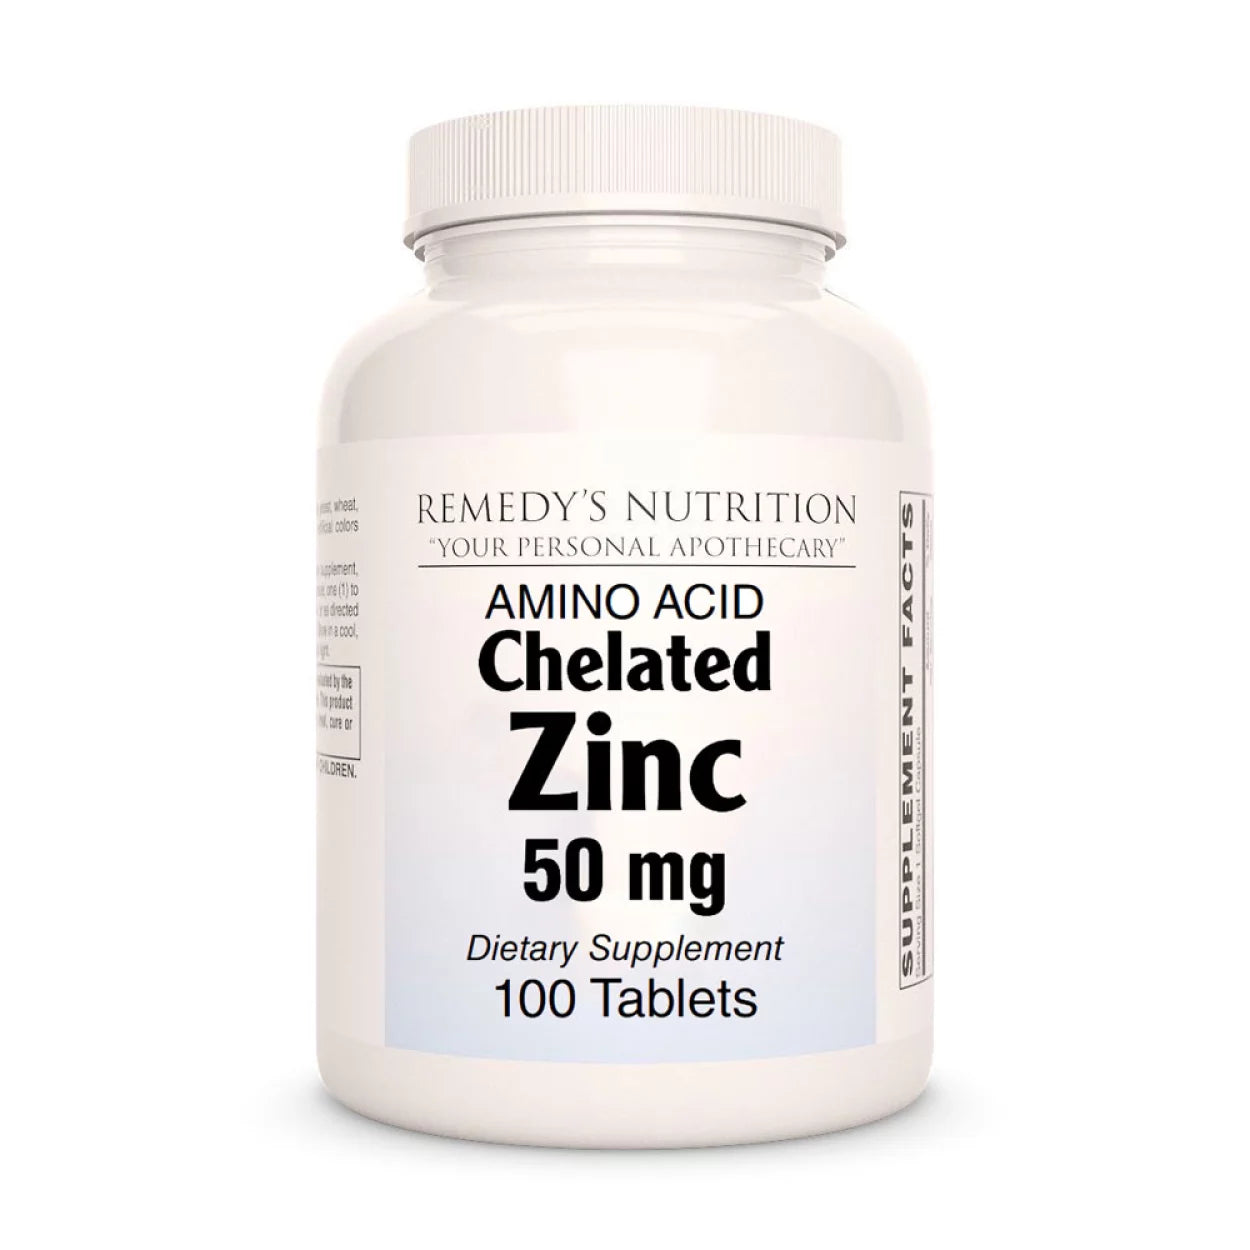 Image of Remedy's Nutrition® Chelated Zinc Tablets Dietary Supplement front bottle. Made in the USA.